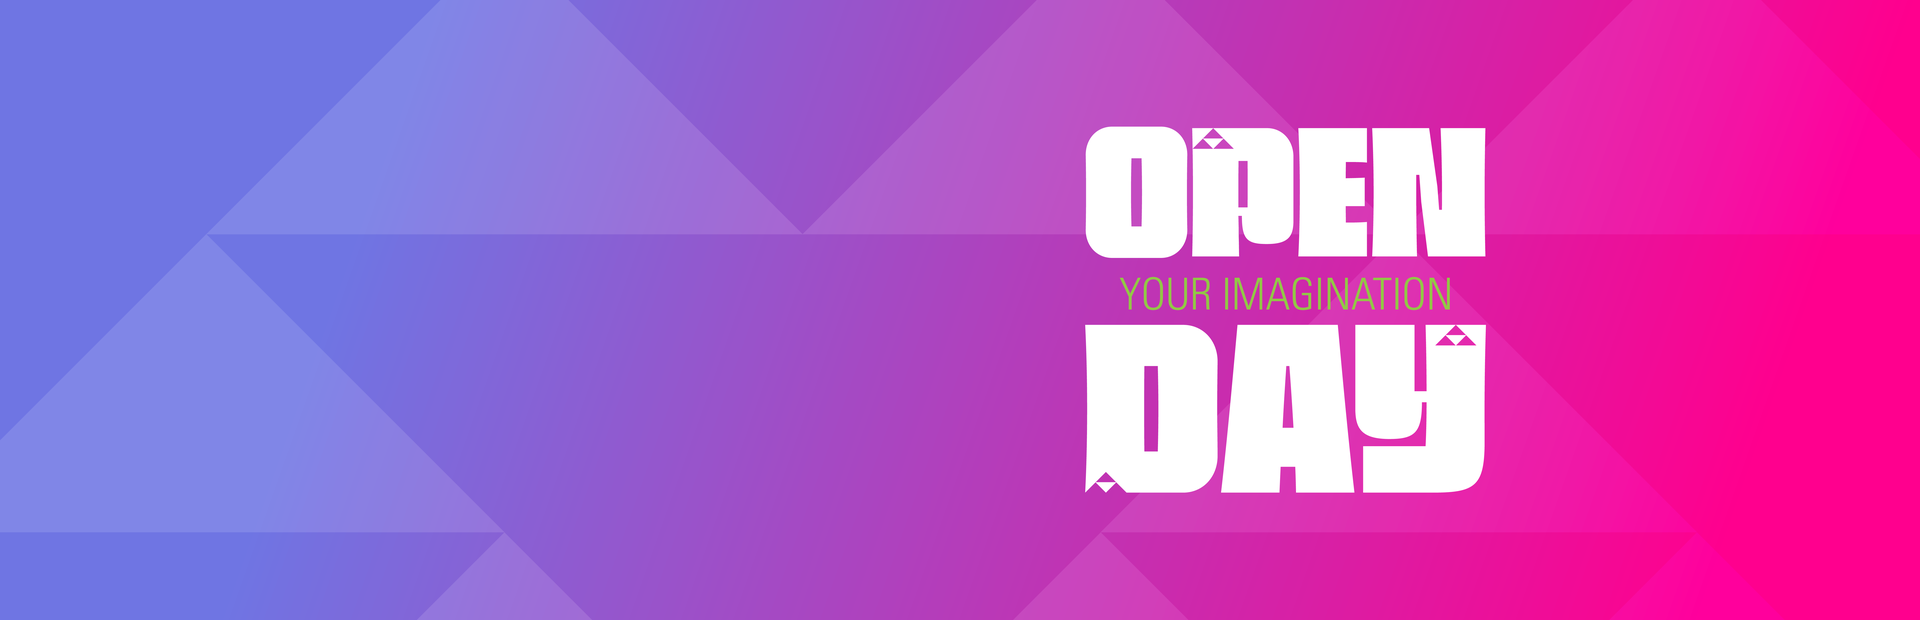 Open your imagination Day banner image